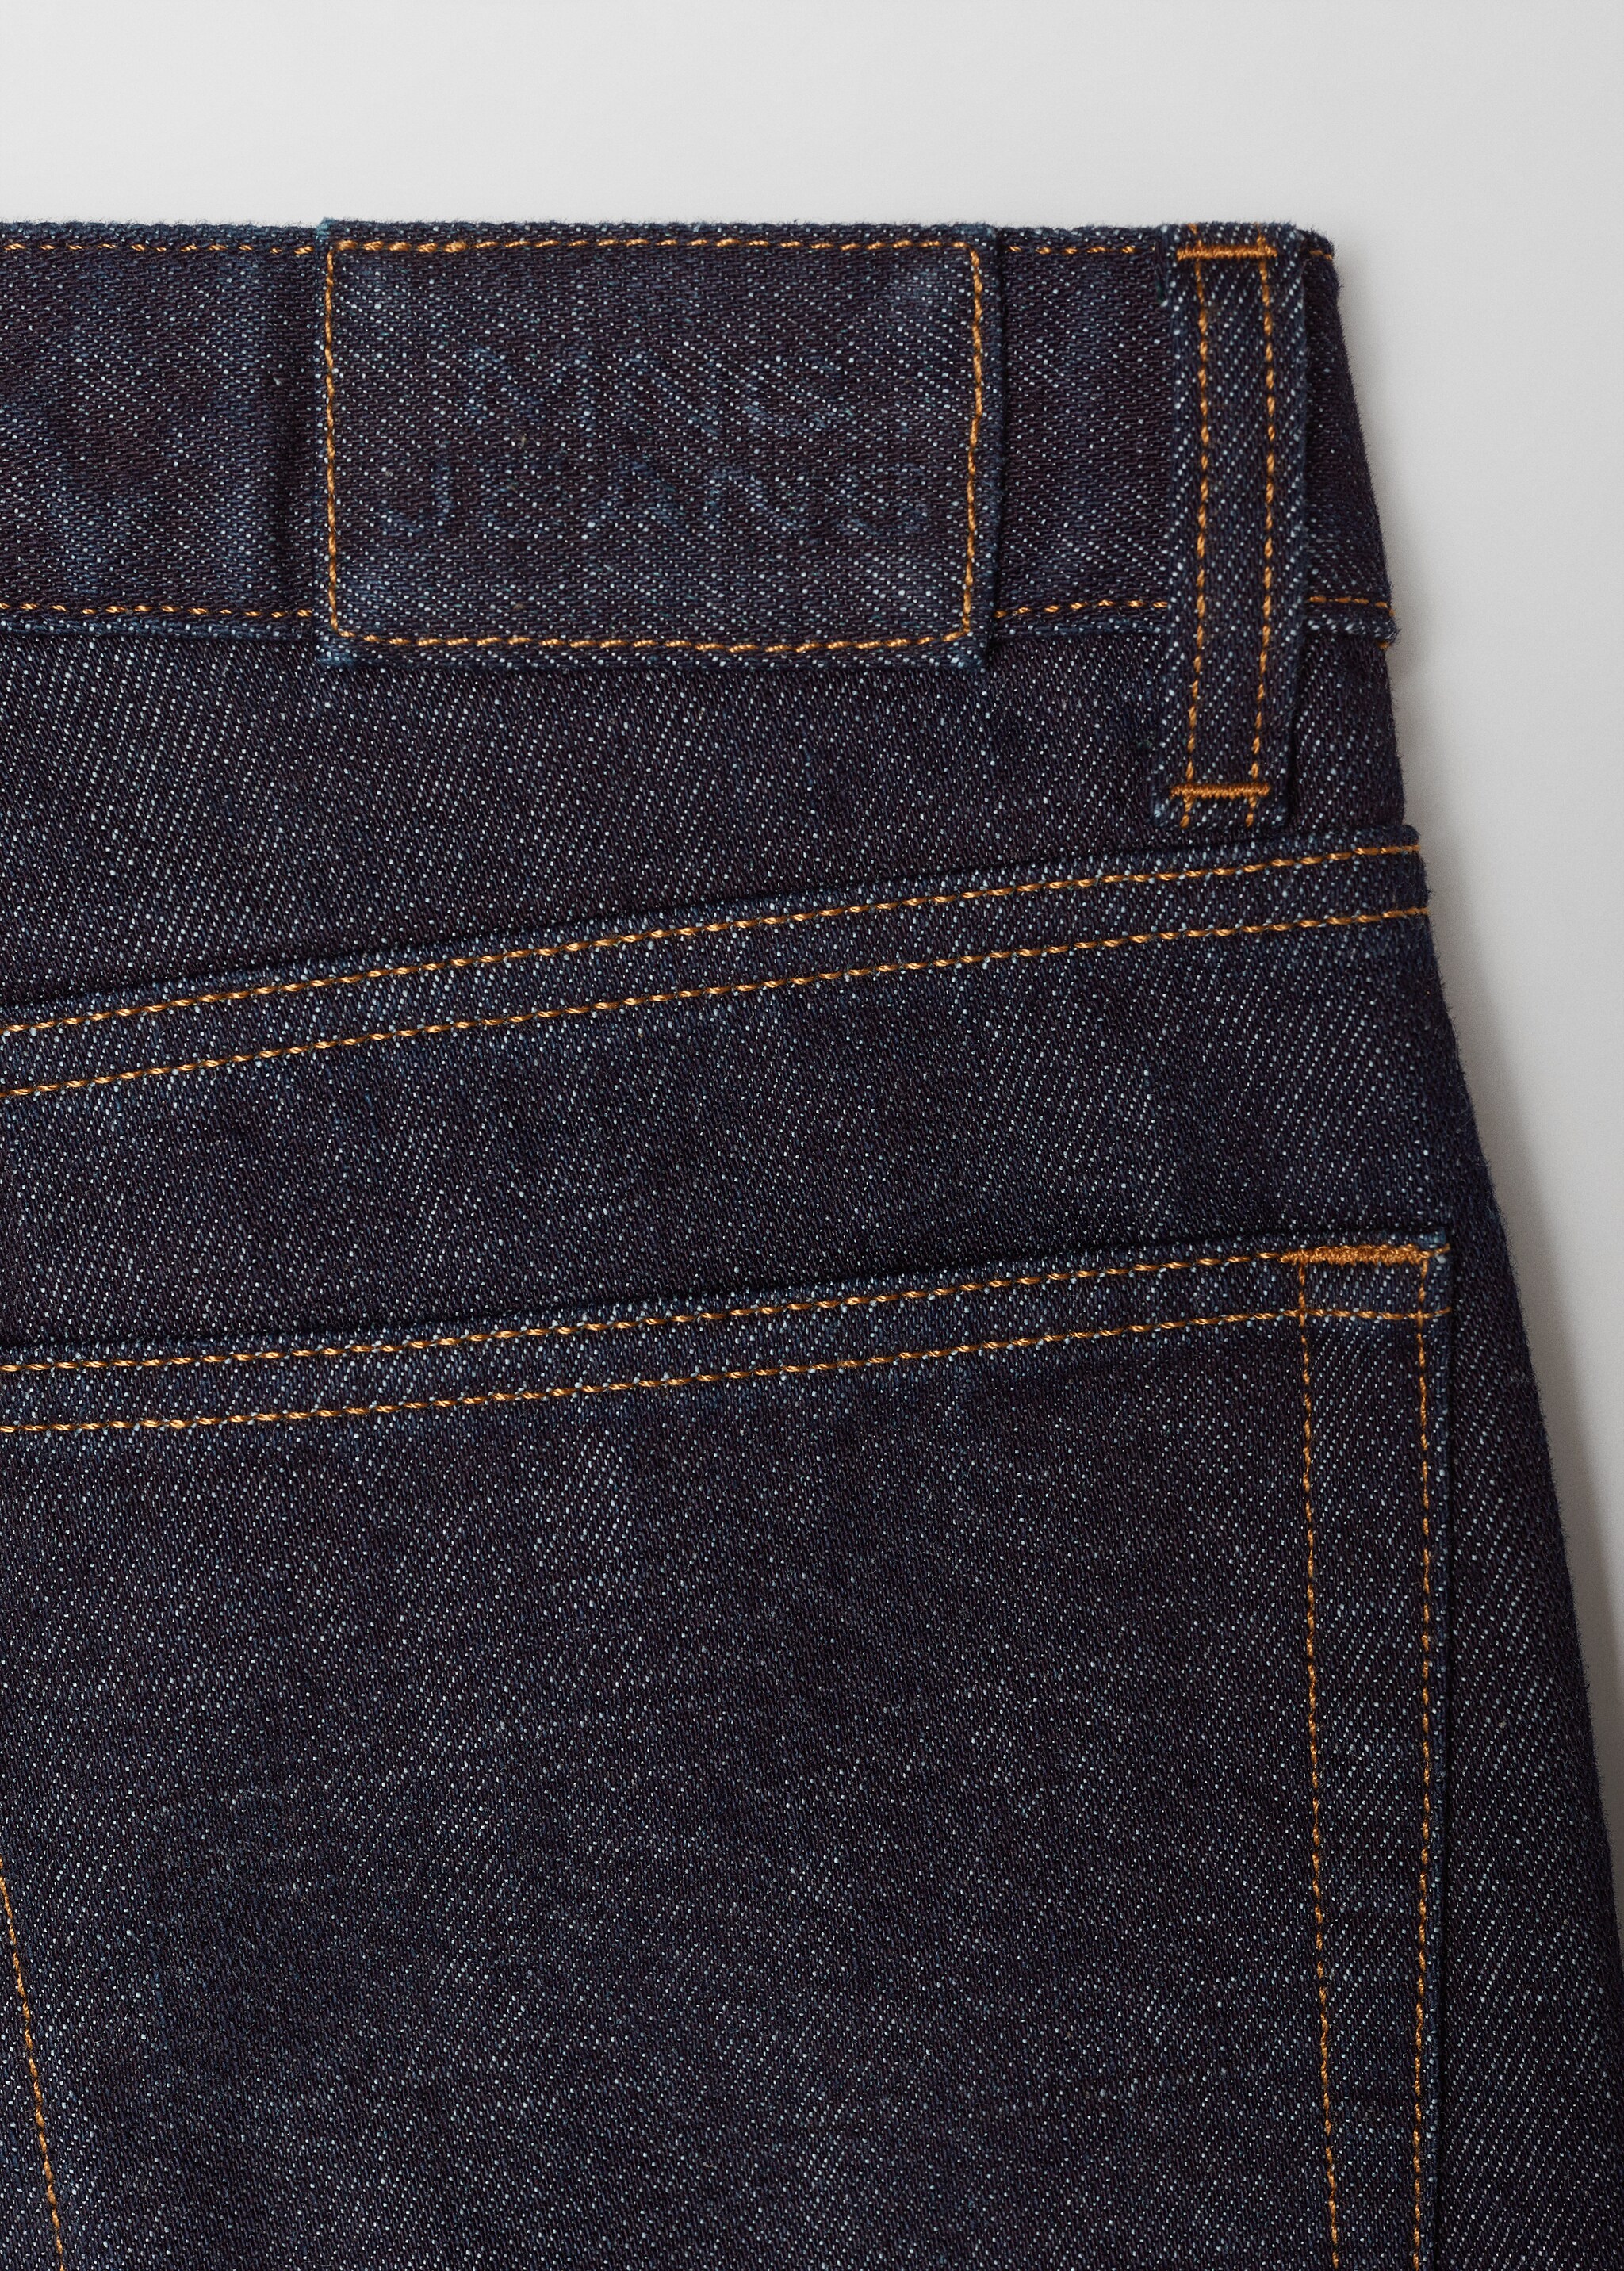 Straight selvedge jeans - Details of the article 7